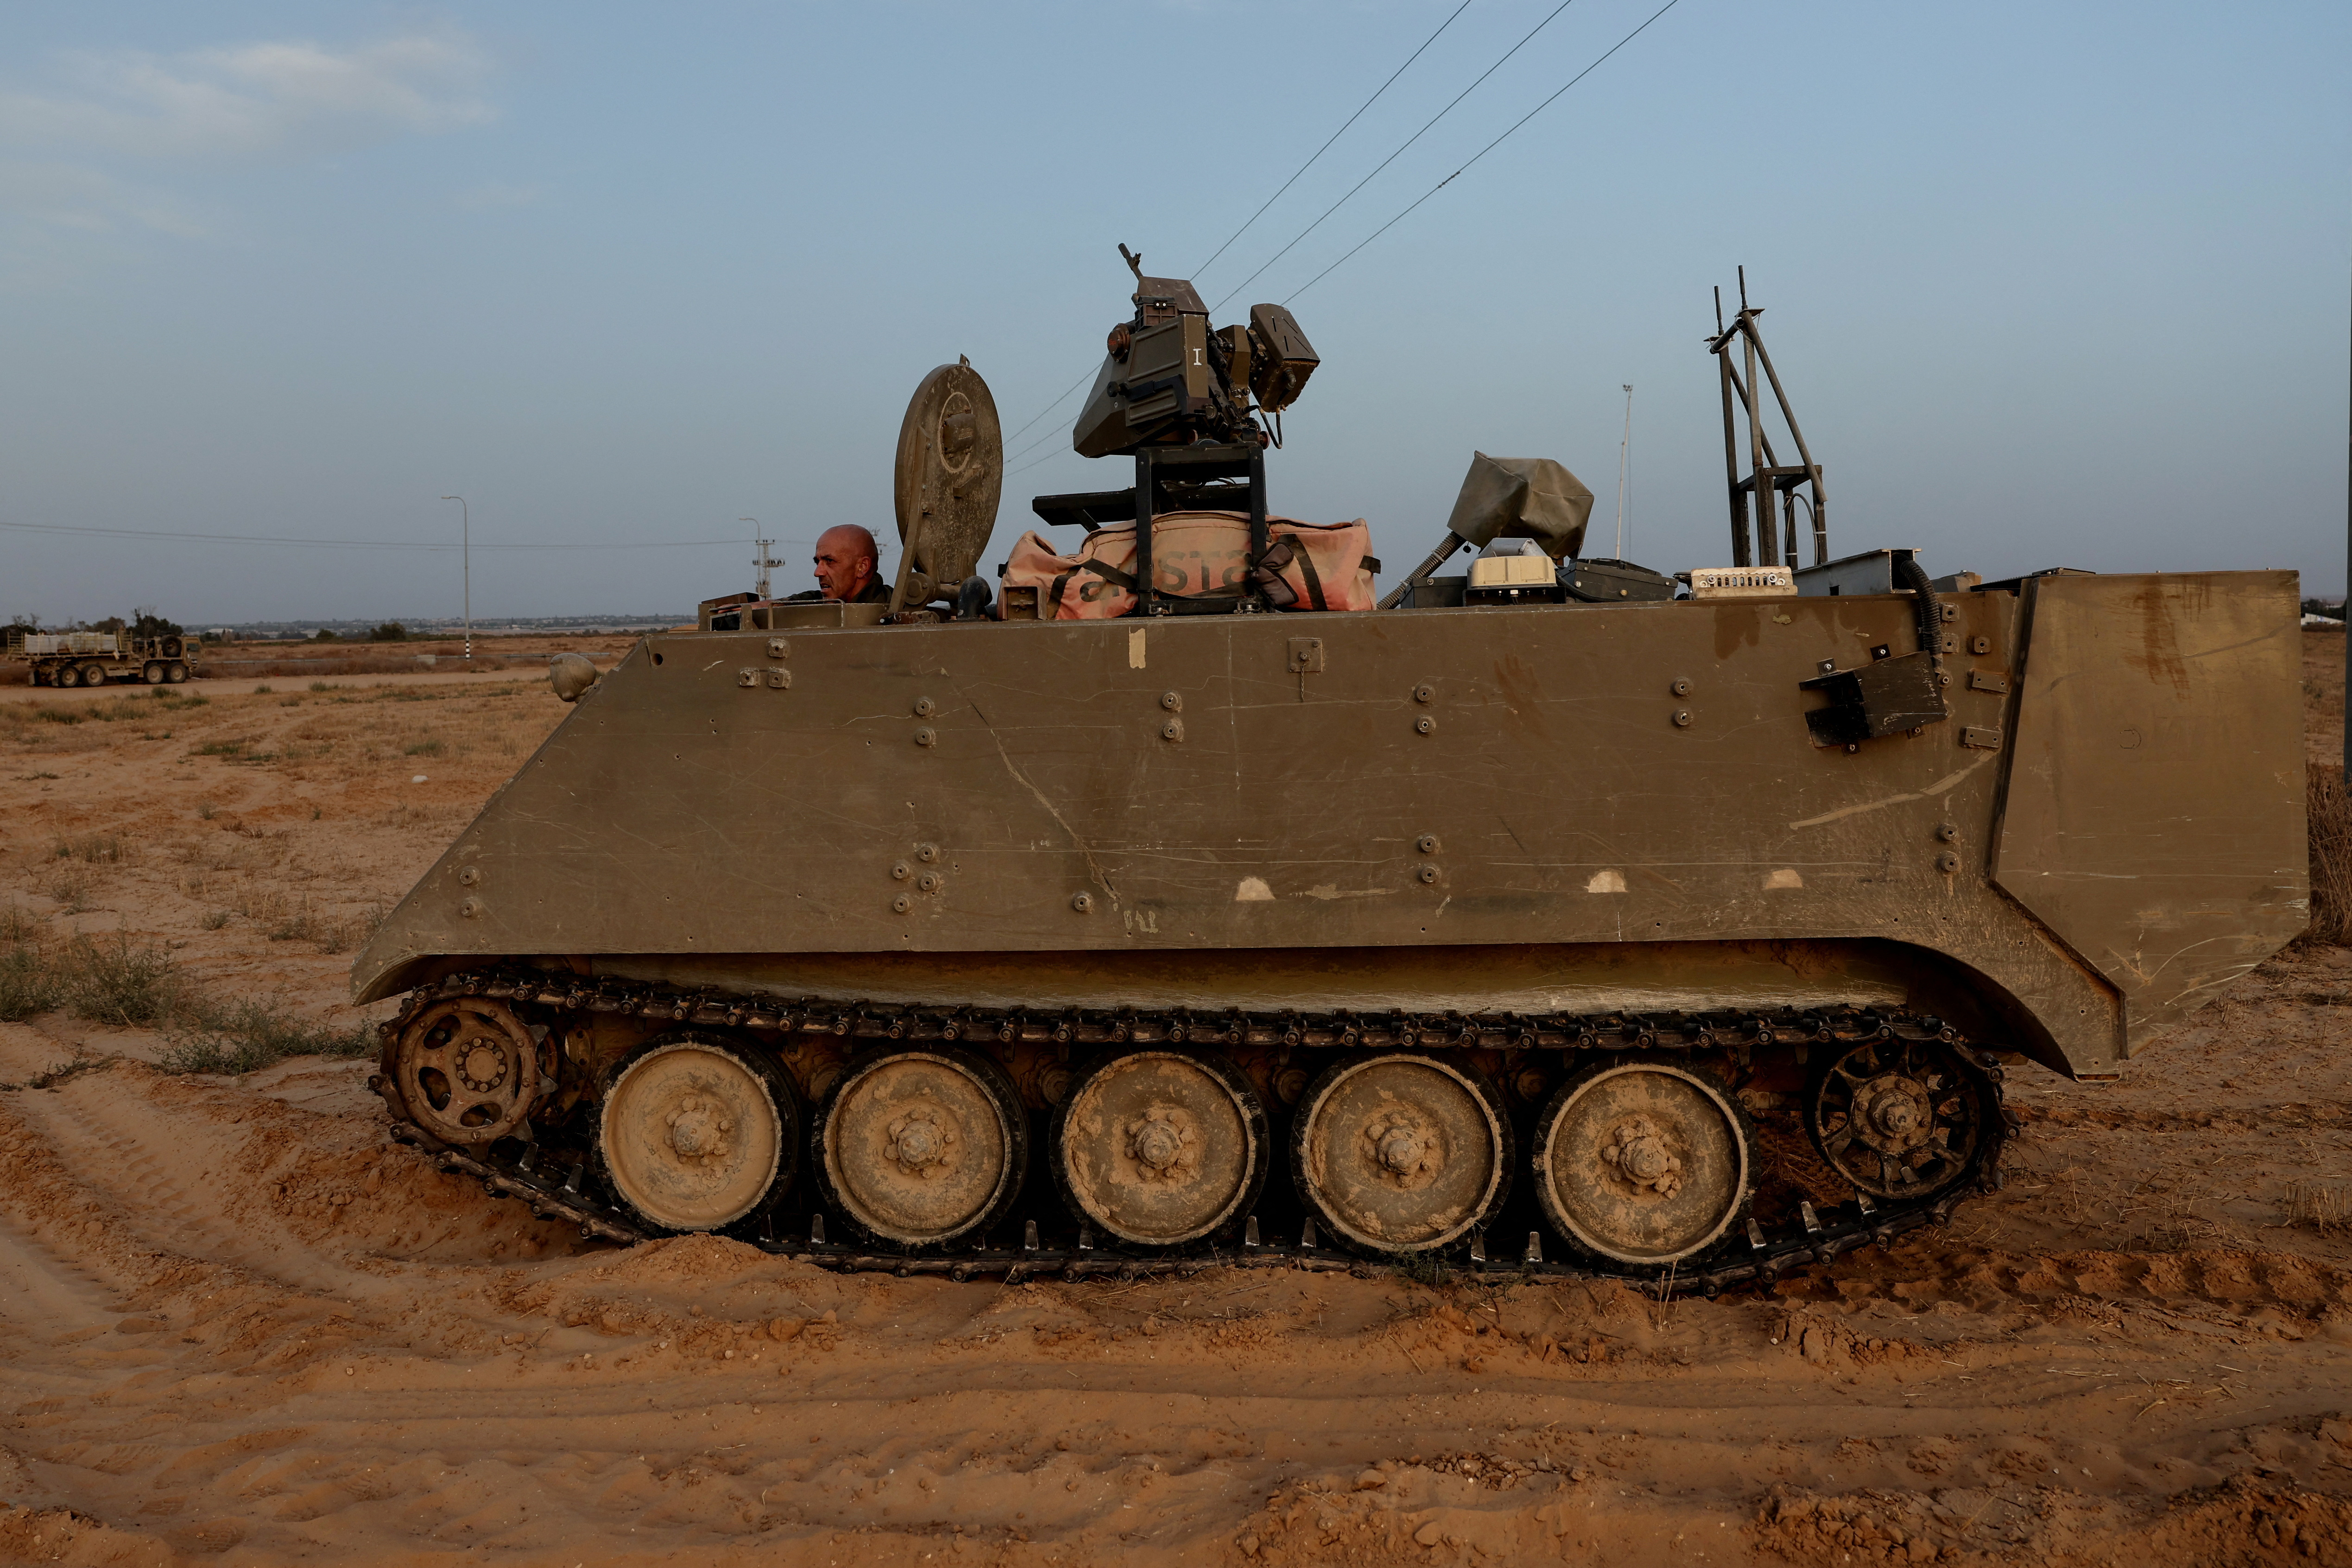 An Israeli solider drives an armored personnel carrier, as military operations continue in the southern Gaza city of Rafah, at an area outside Kerem Shalom, Israel